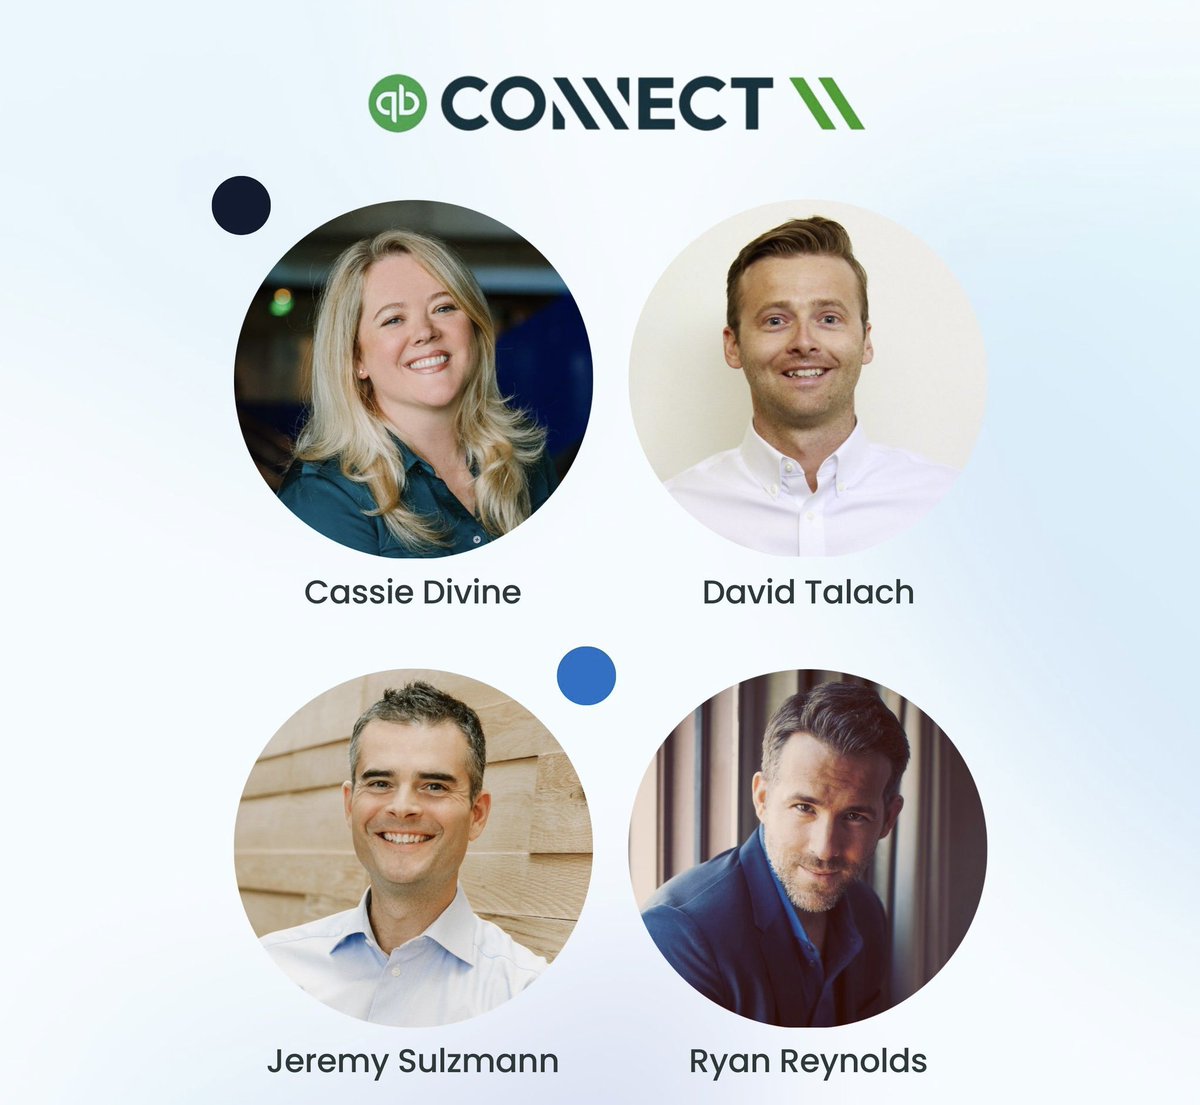 Excited to share the #QBConnect stage with some great speakers today. Can't wait to hear what @VancityReynolds, @divinecassie, and David Talach have in store for our attendees.